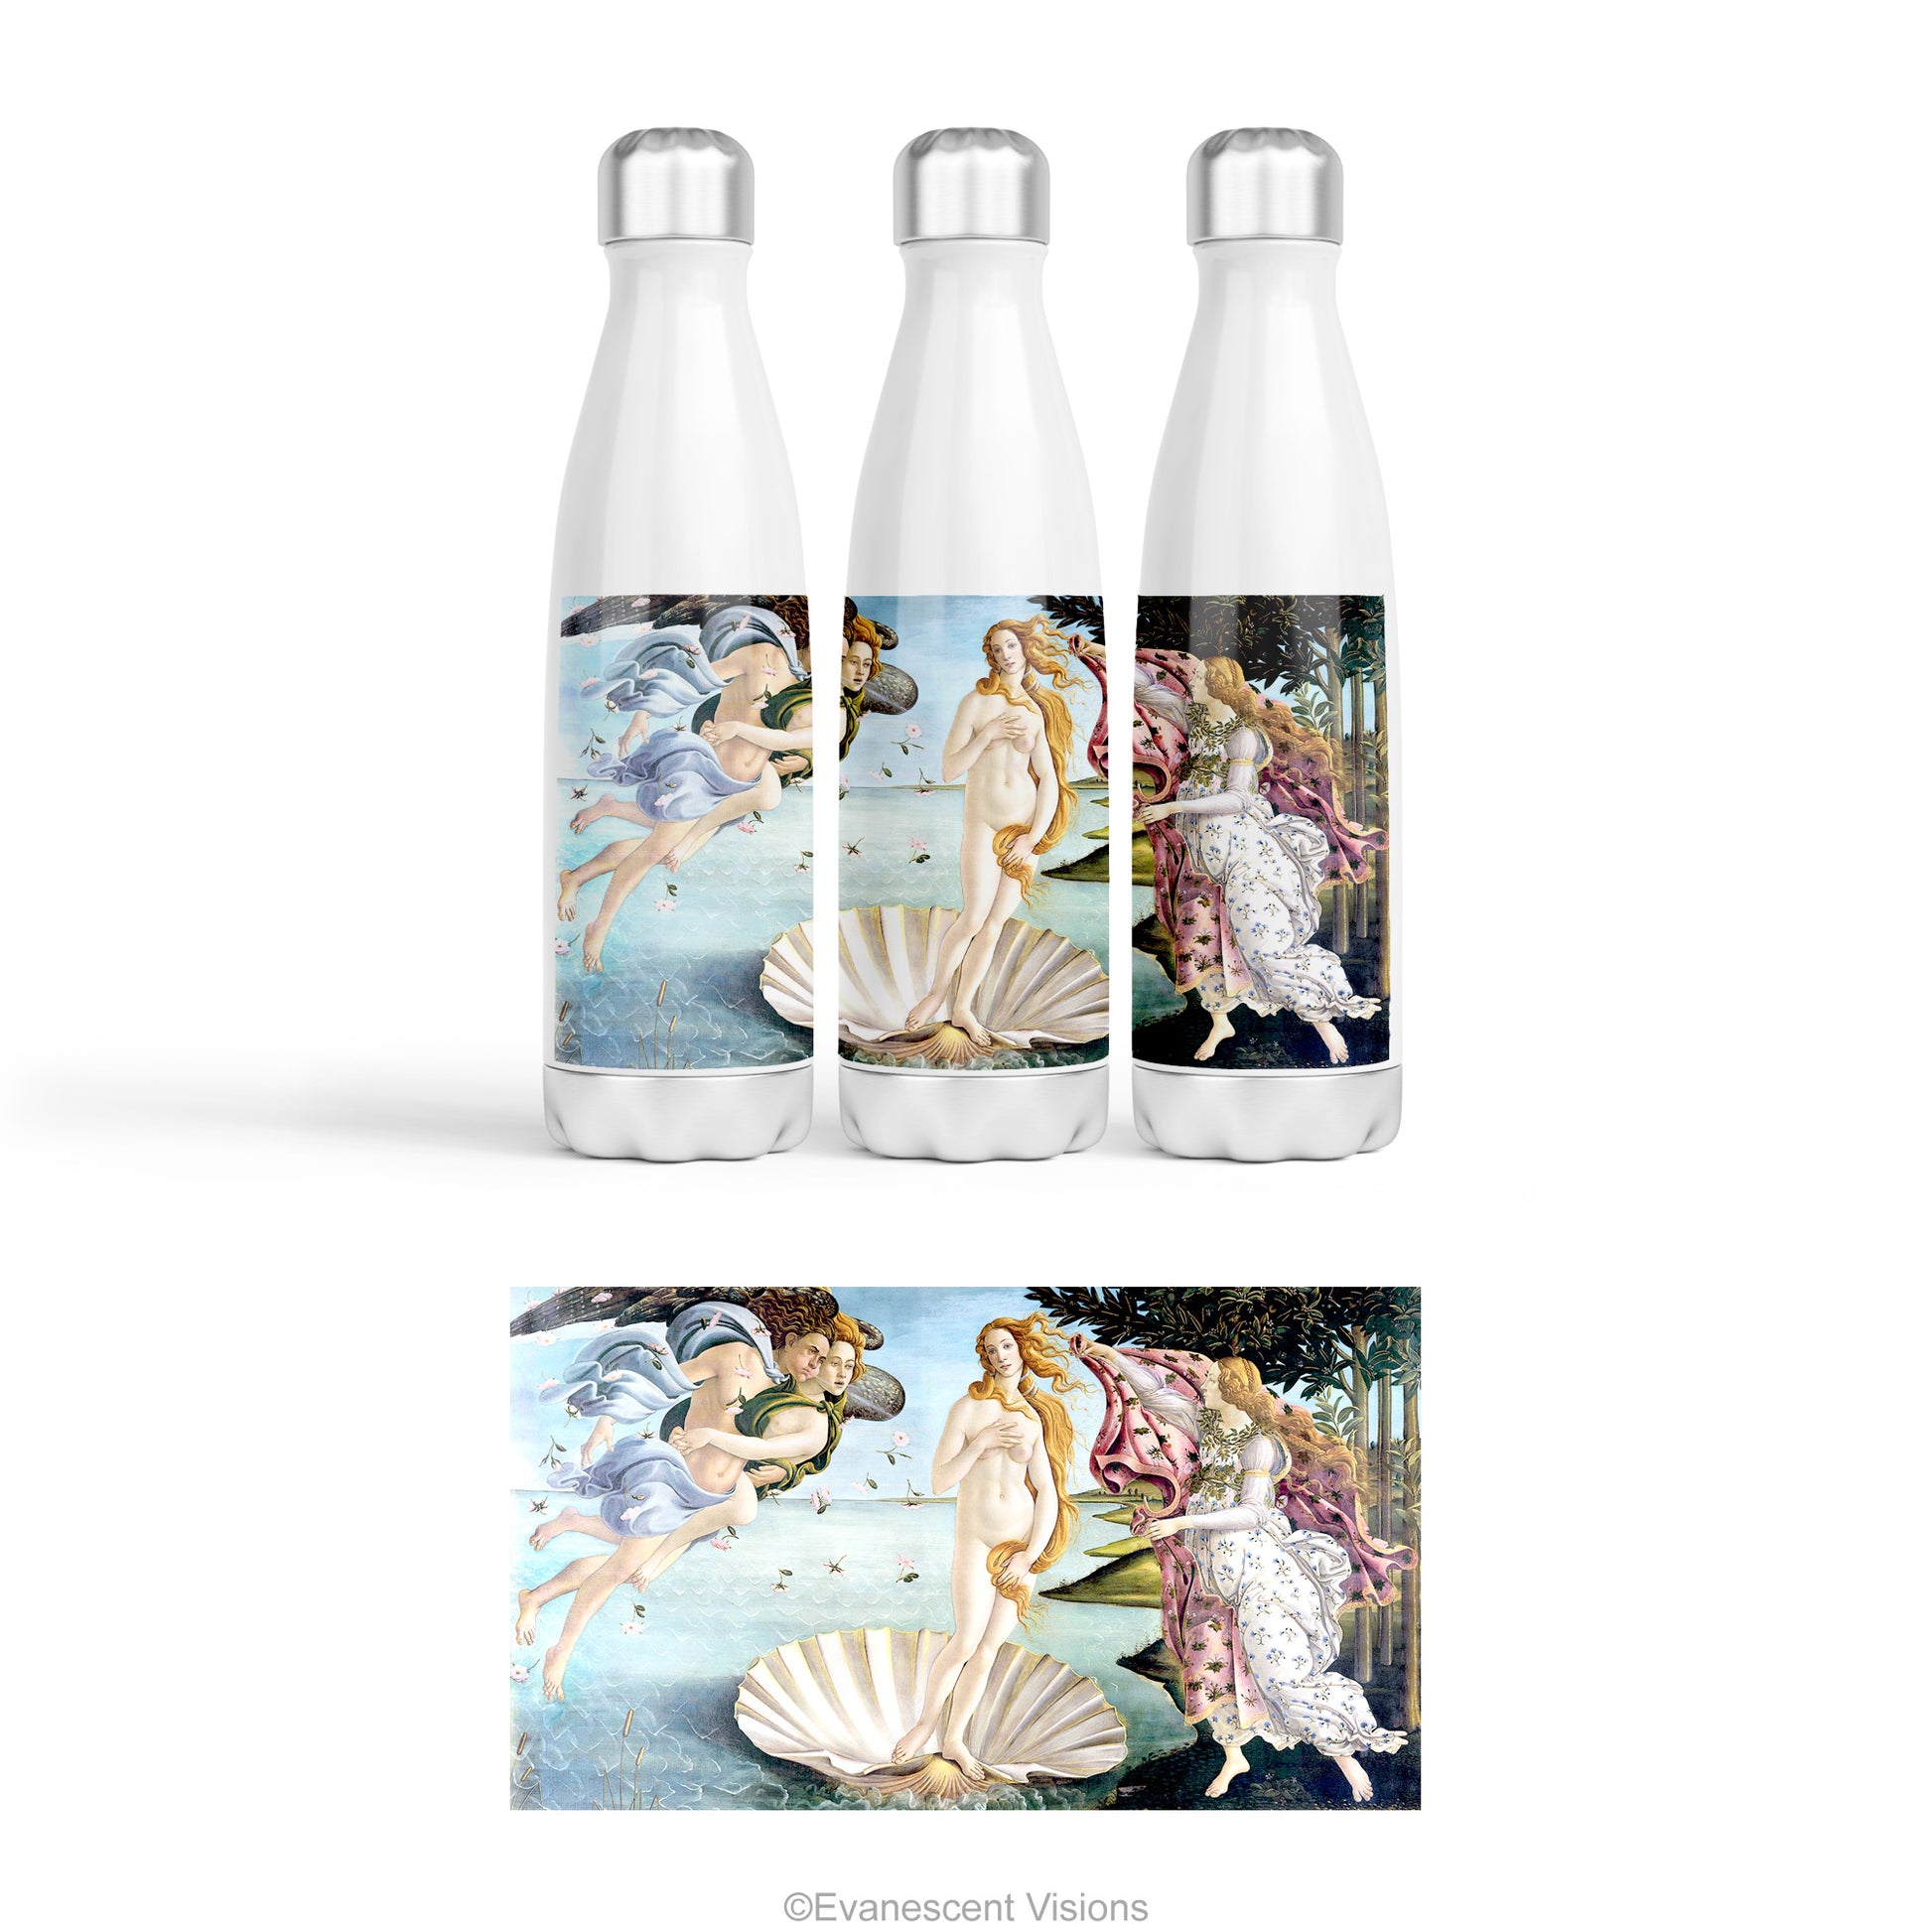 Front, right and left views of the Birth of Venus Stainless Steel Water Bottle, Thermos with full design image shown below